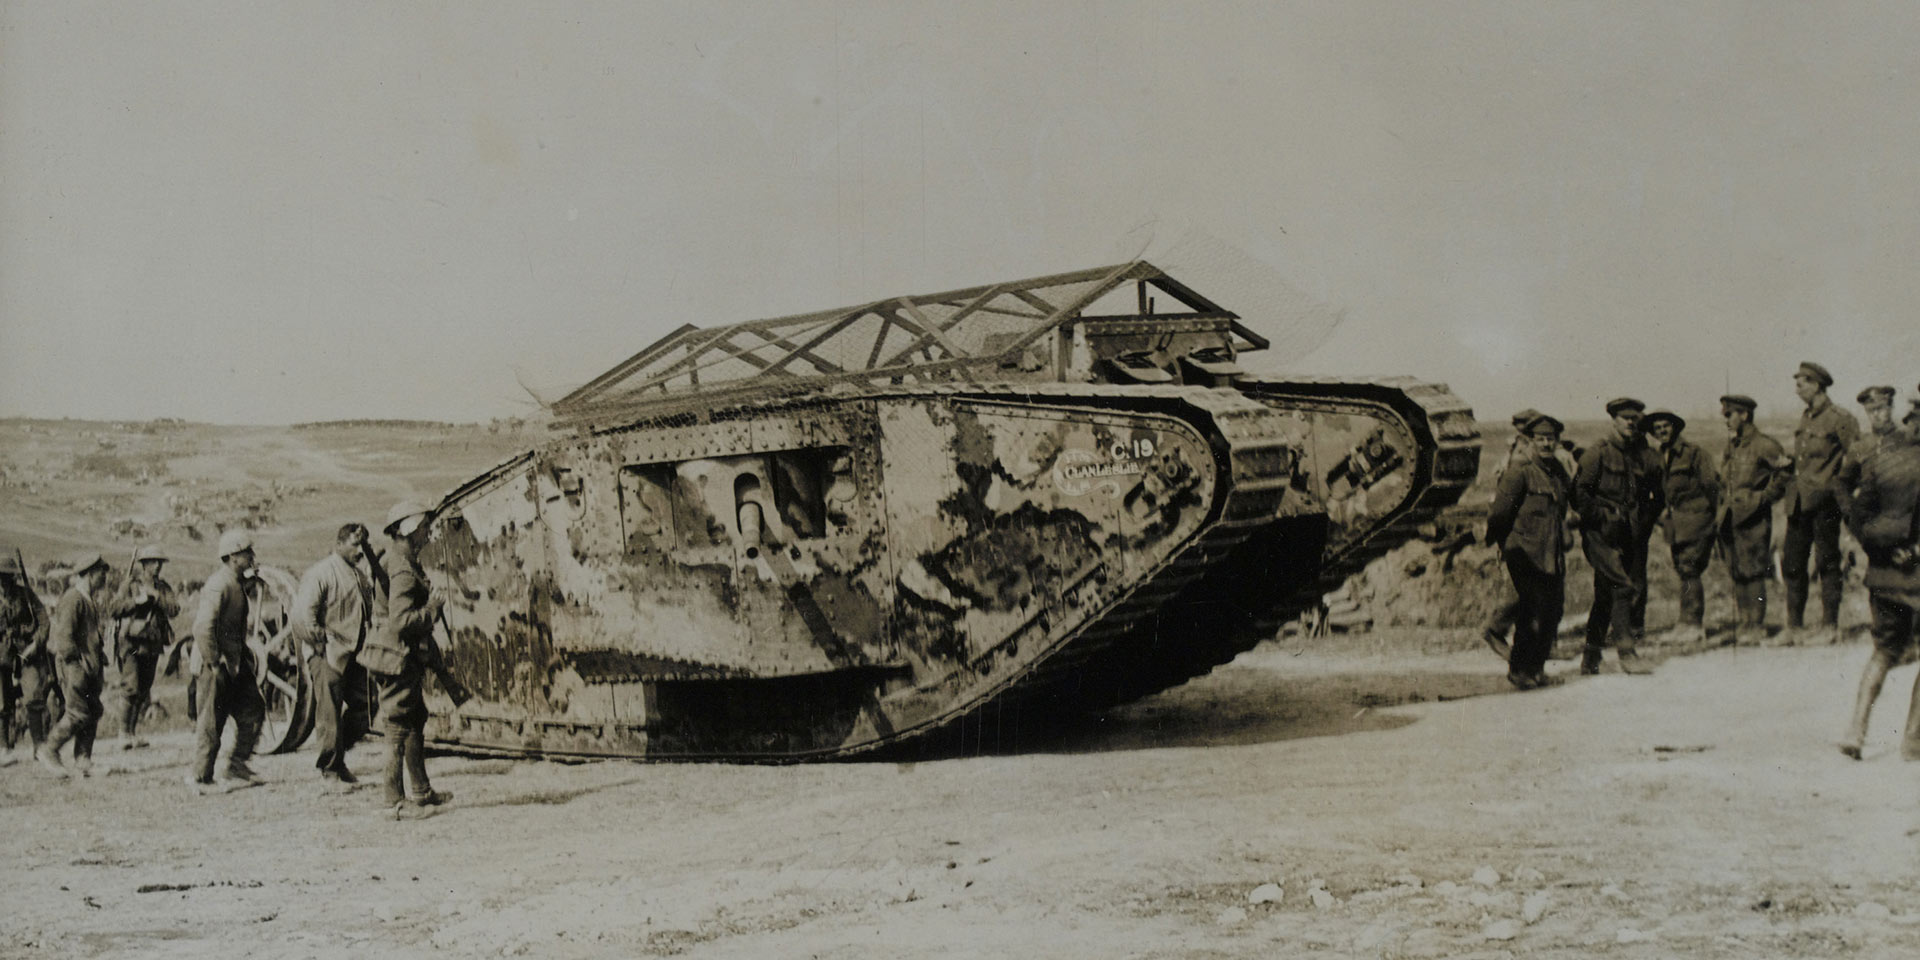 A tank making its way to the front line at Flers, 15 September 1916